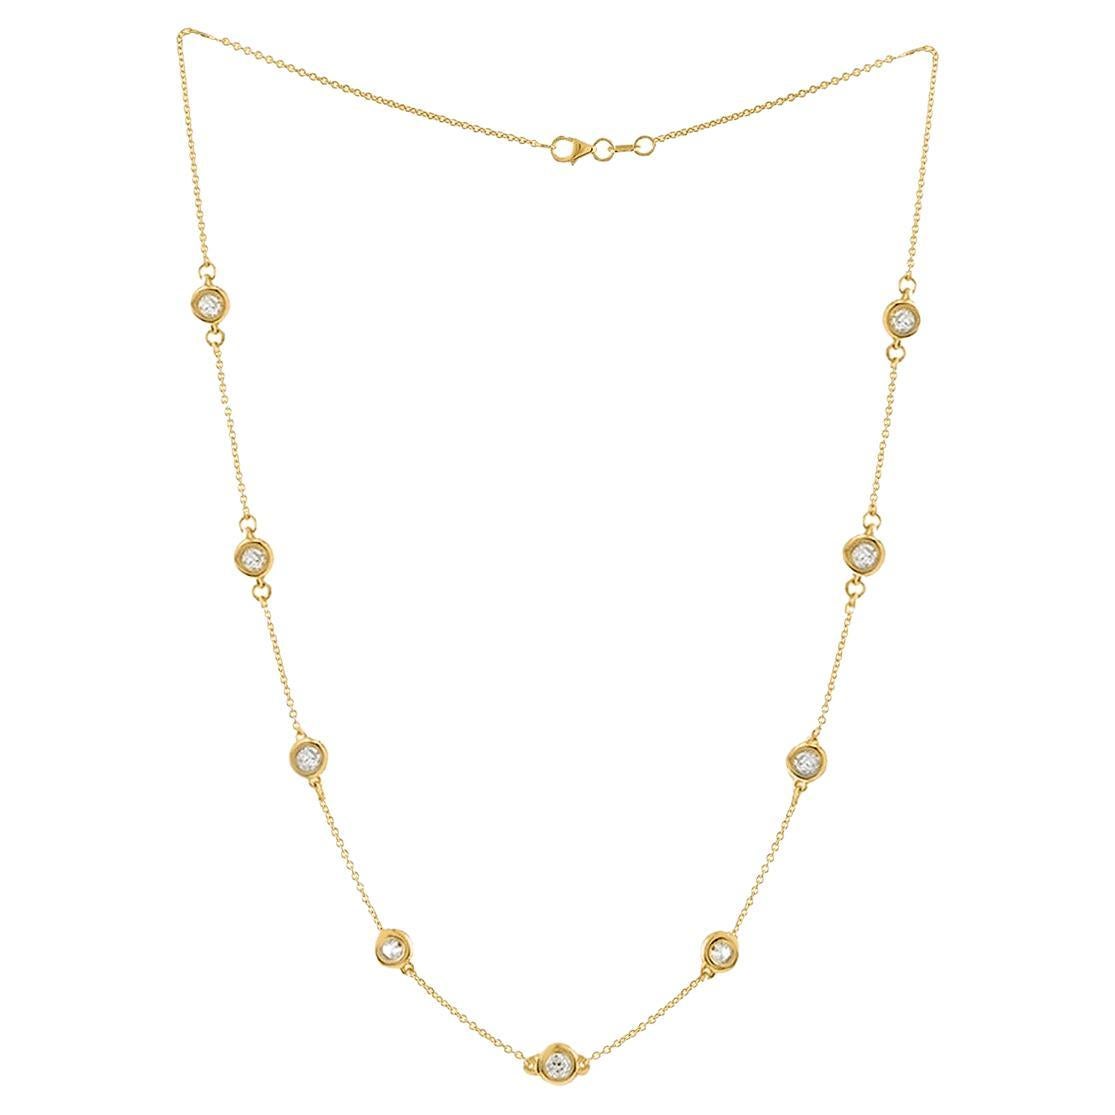 Diana M. 14kt yellow gold, 18" diamonds-by-the-yard necklace featuring 2.25 cts 